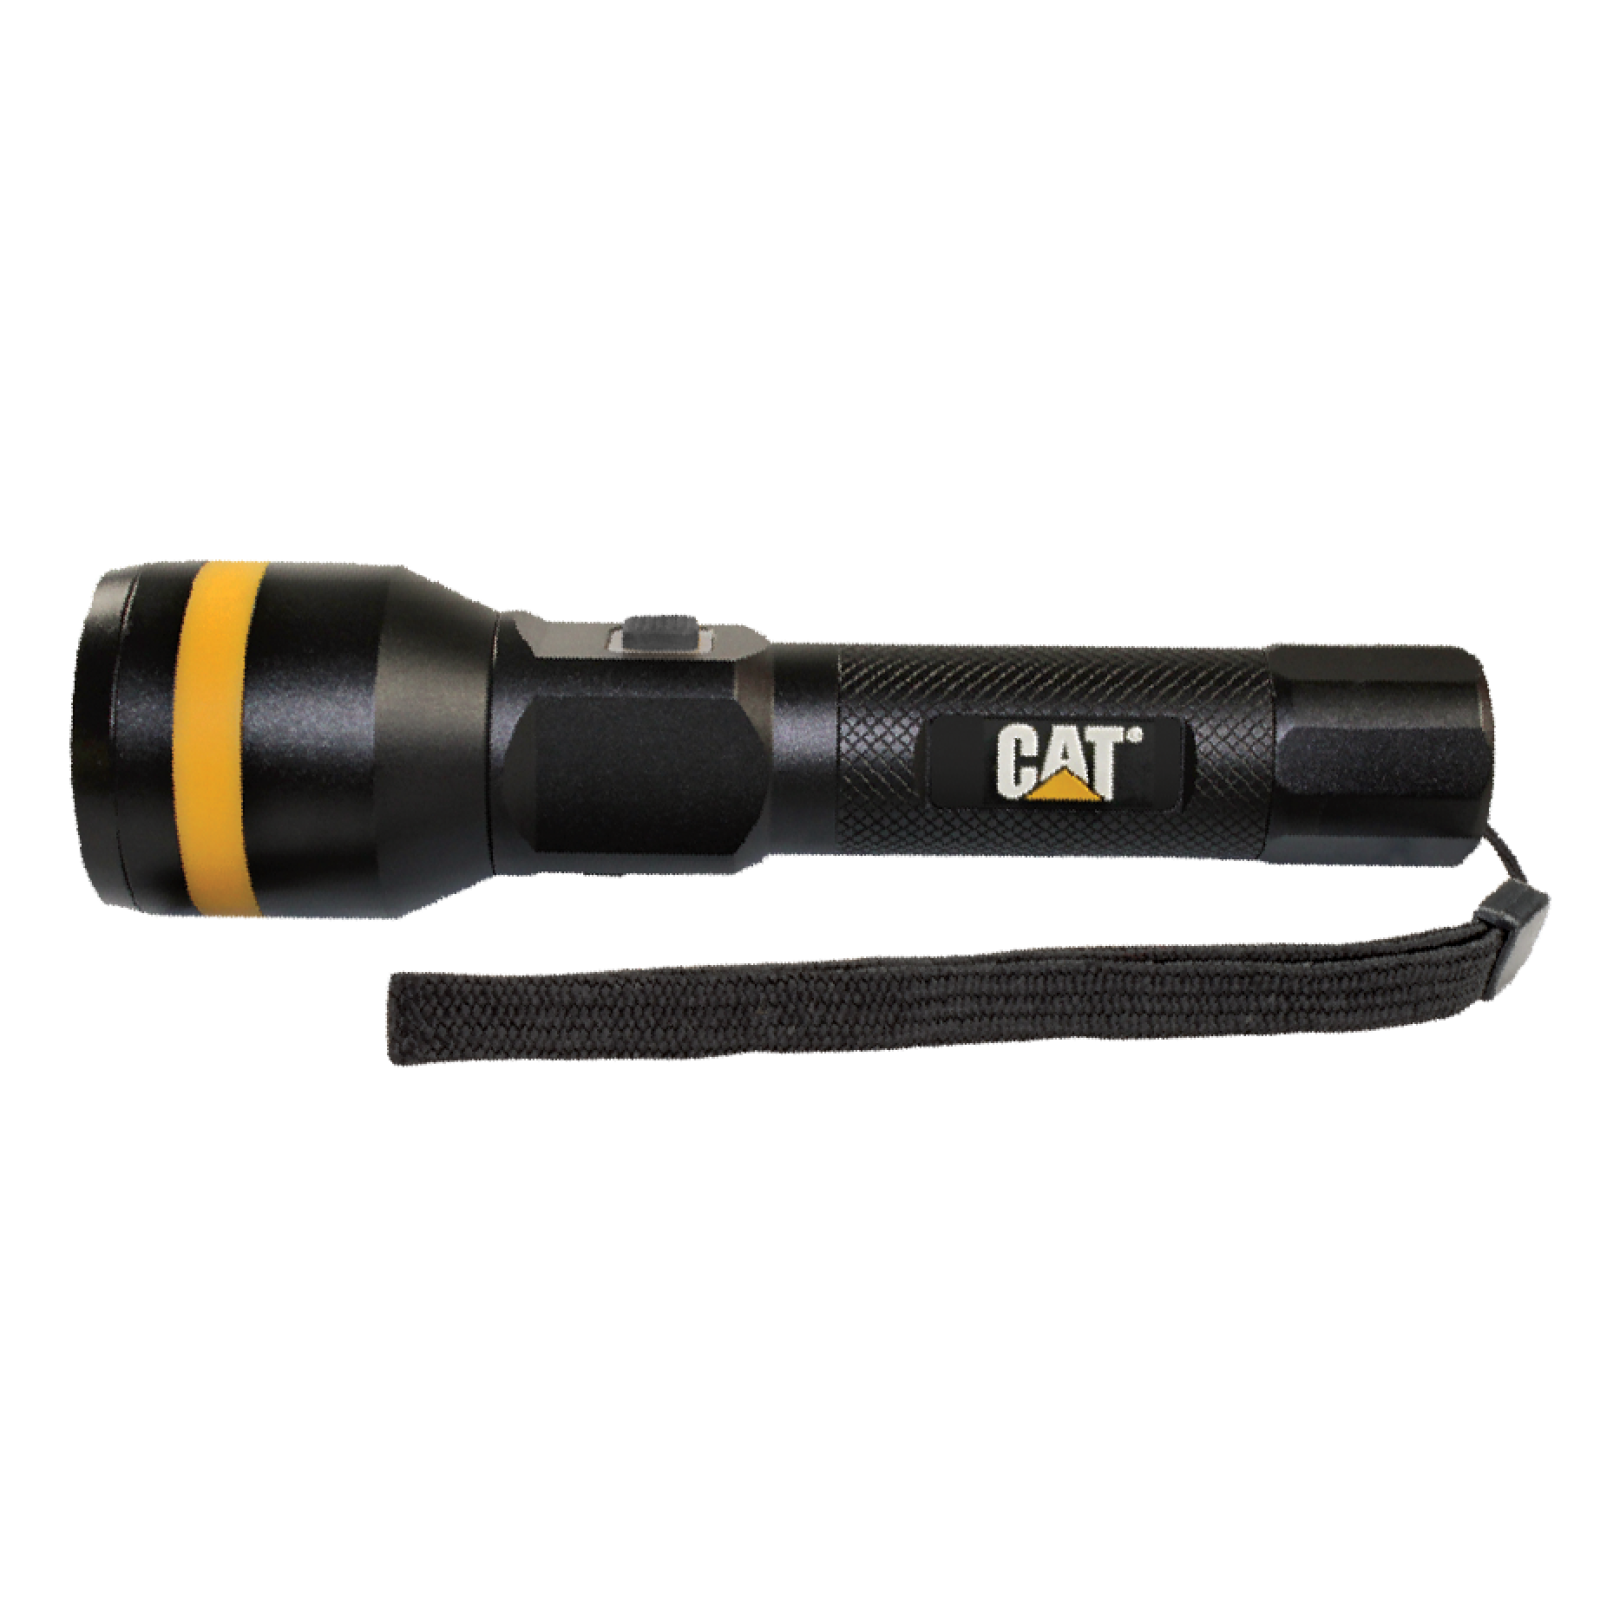 Фенер CAT CT24565, Rechargeable, USB In+Out, Focusing Tatical Lights, 700lm, Черен